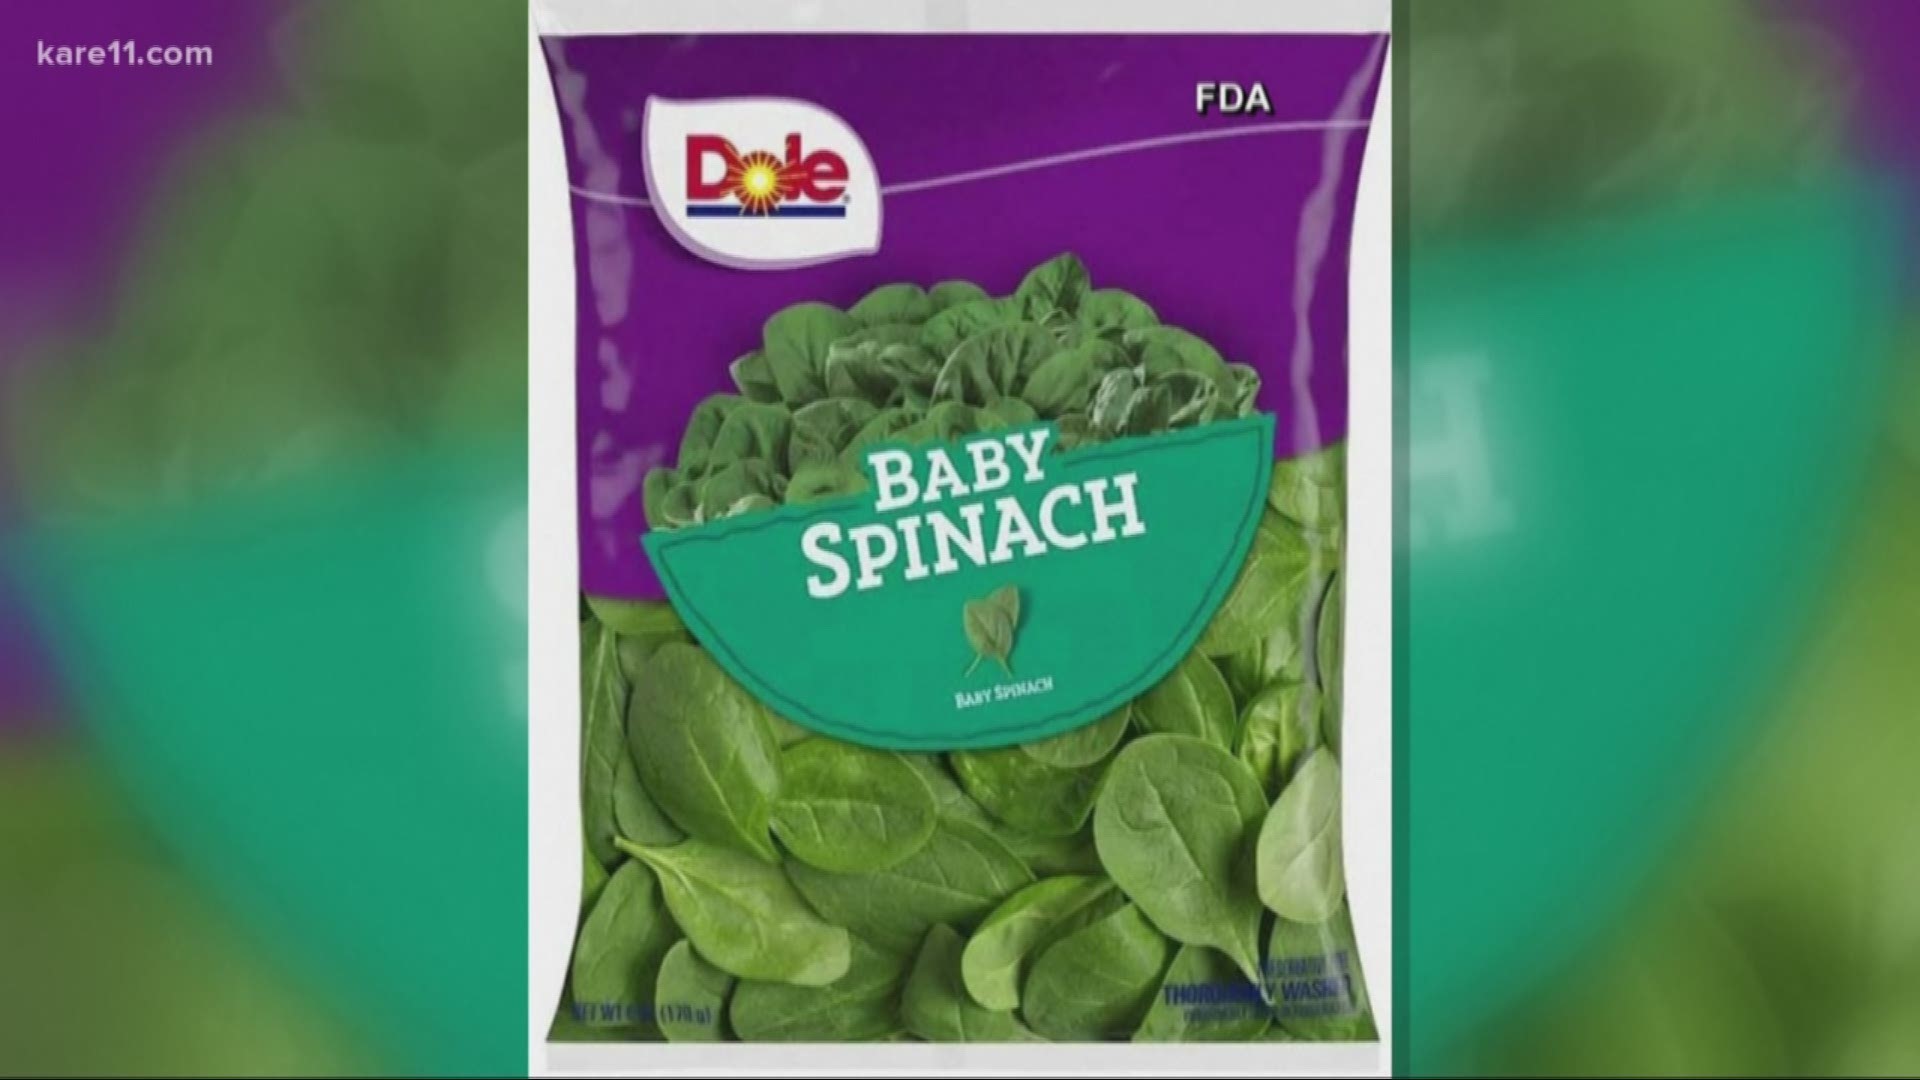 This precautionary Recall notification is being issued due to a sample of Baby Spinach which yielded a positive result for Salmonella in a random sample.